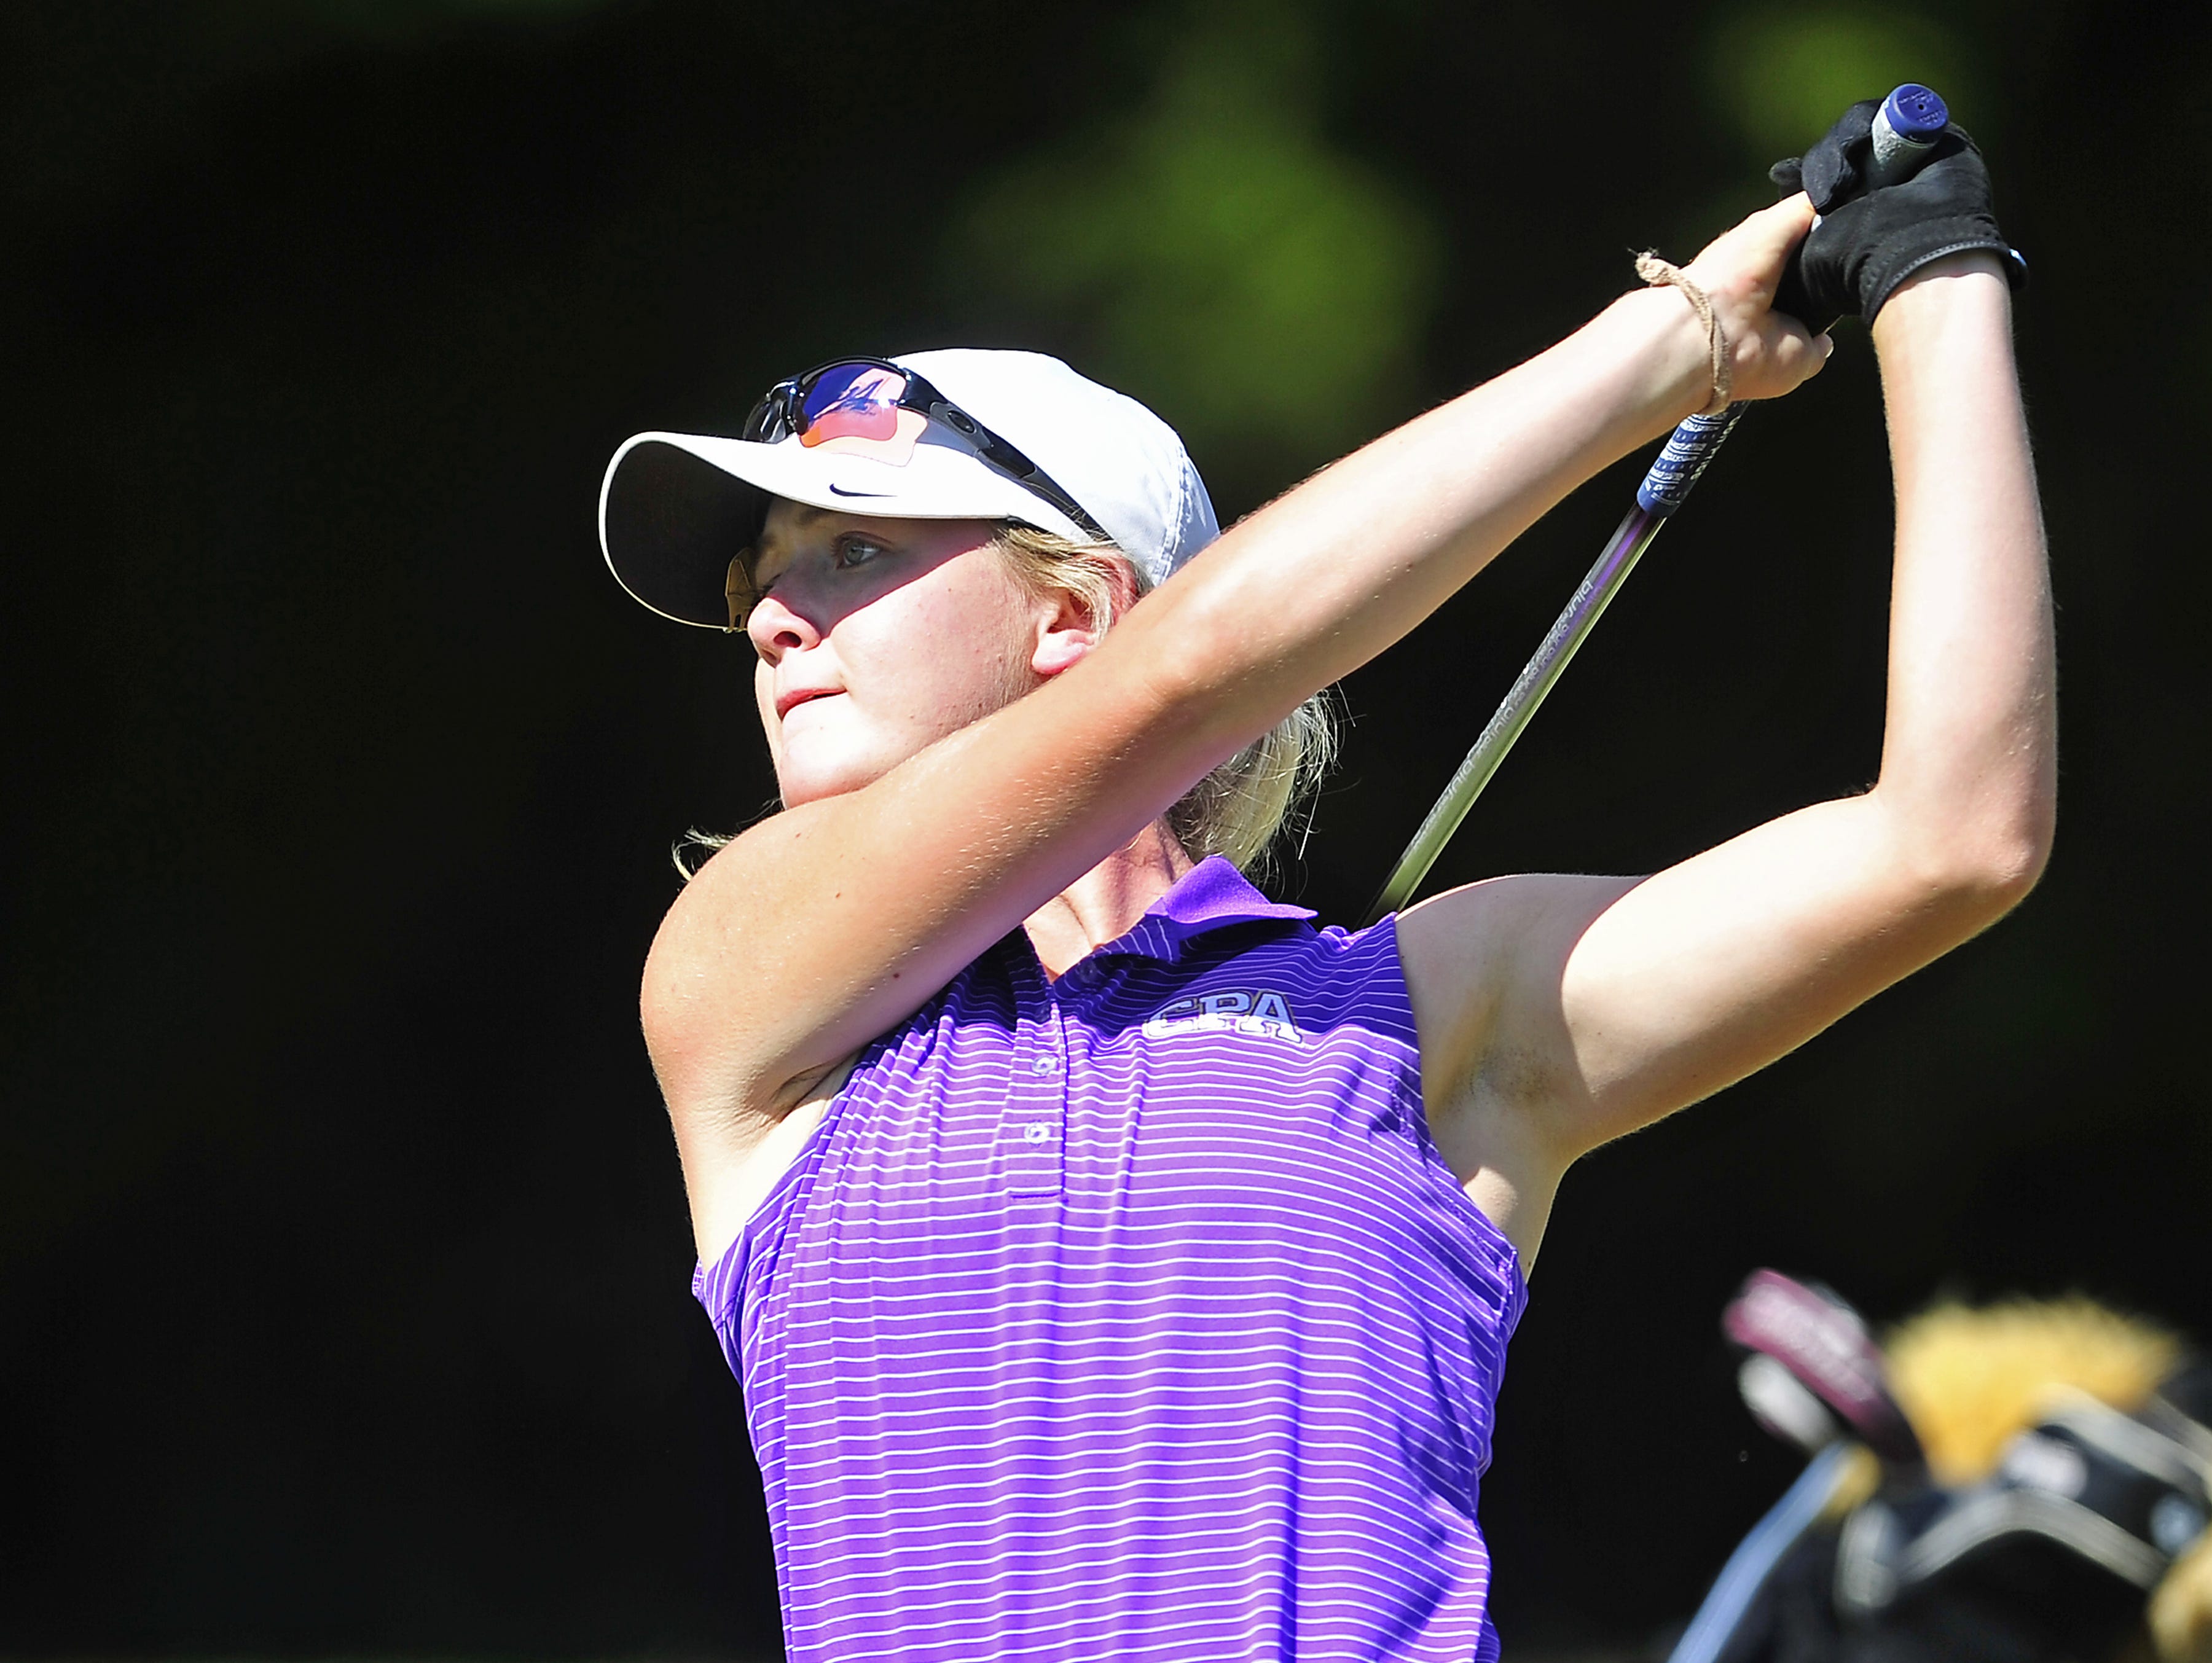 Reigning All-Midstate Girls Golfer of the Year Siarra Stout returns to defend her 2014 Class A-AA individual title.